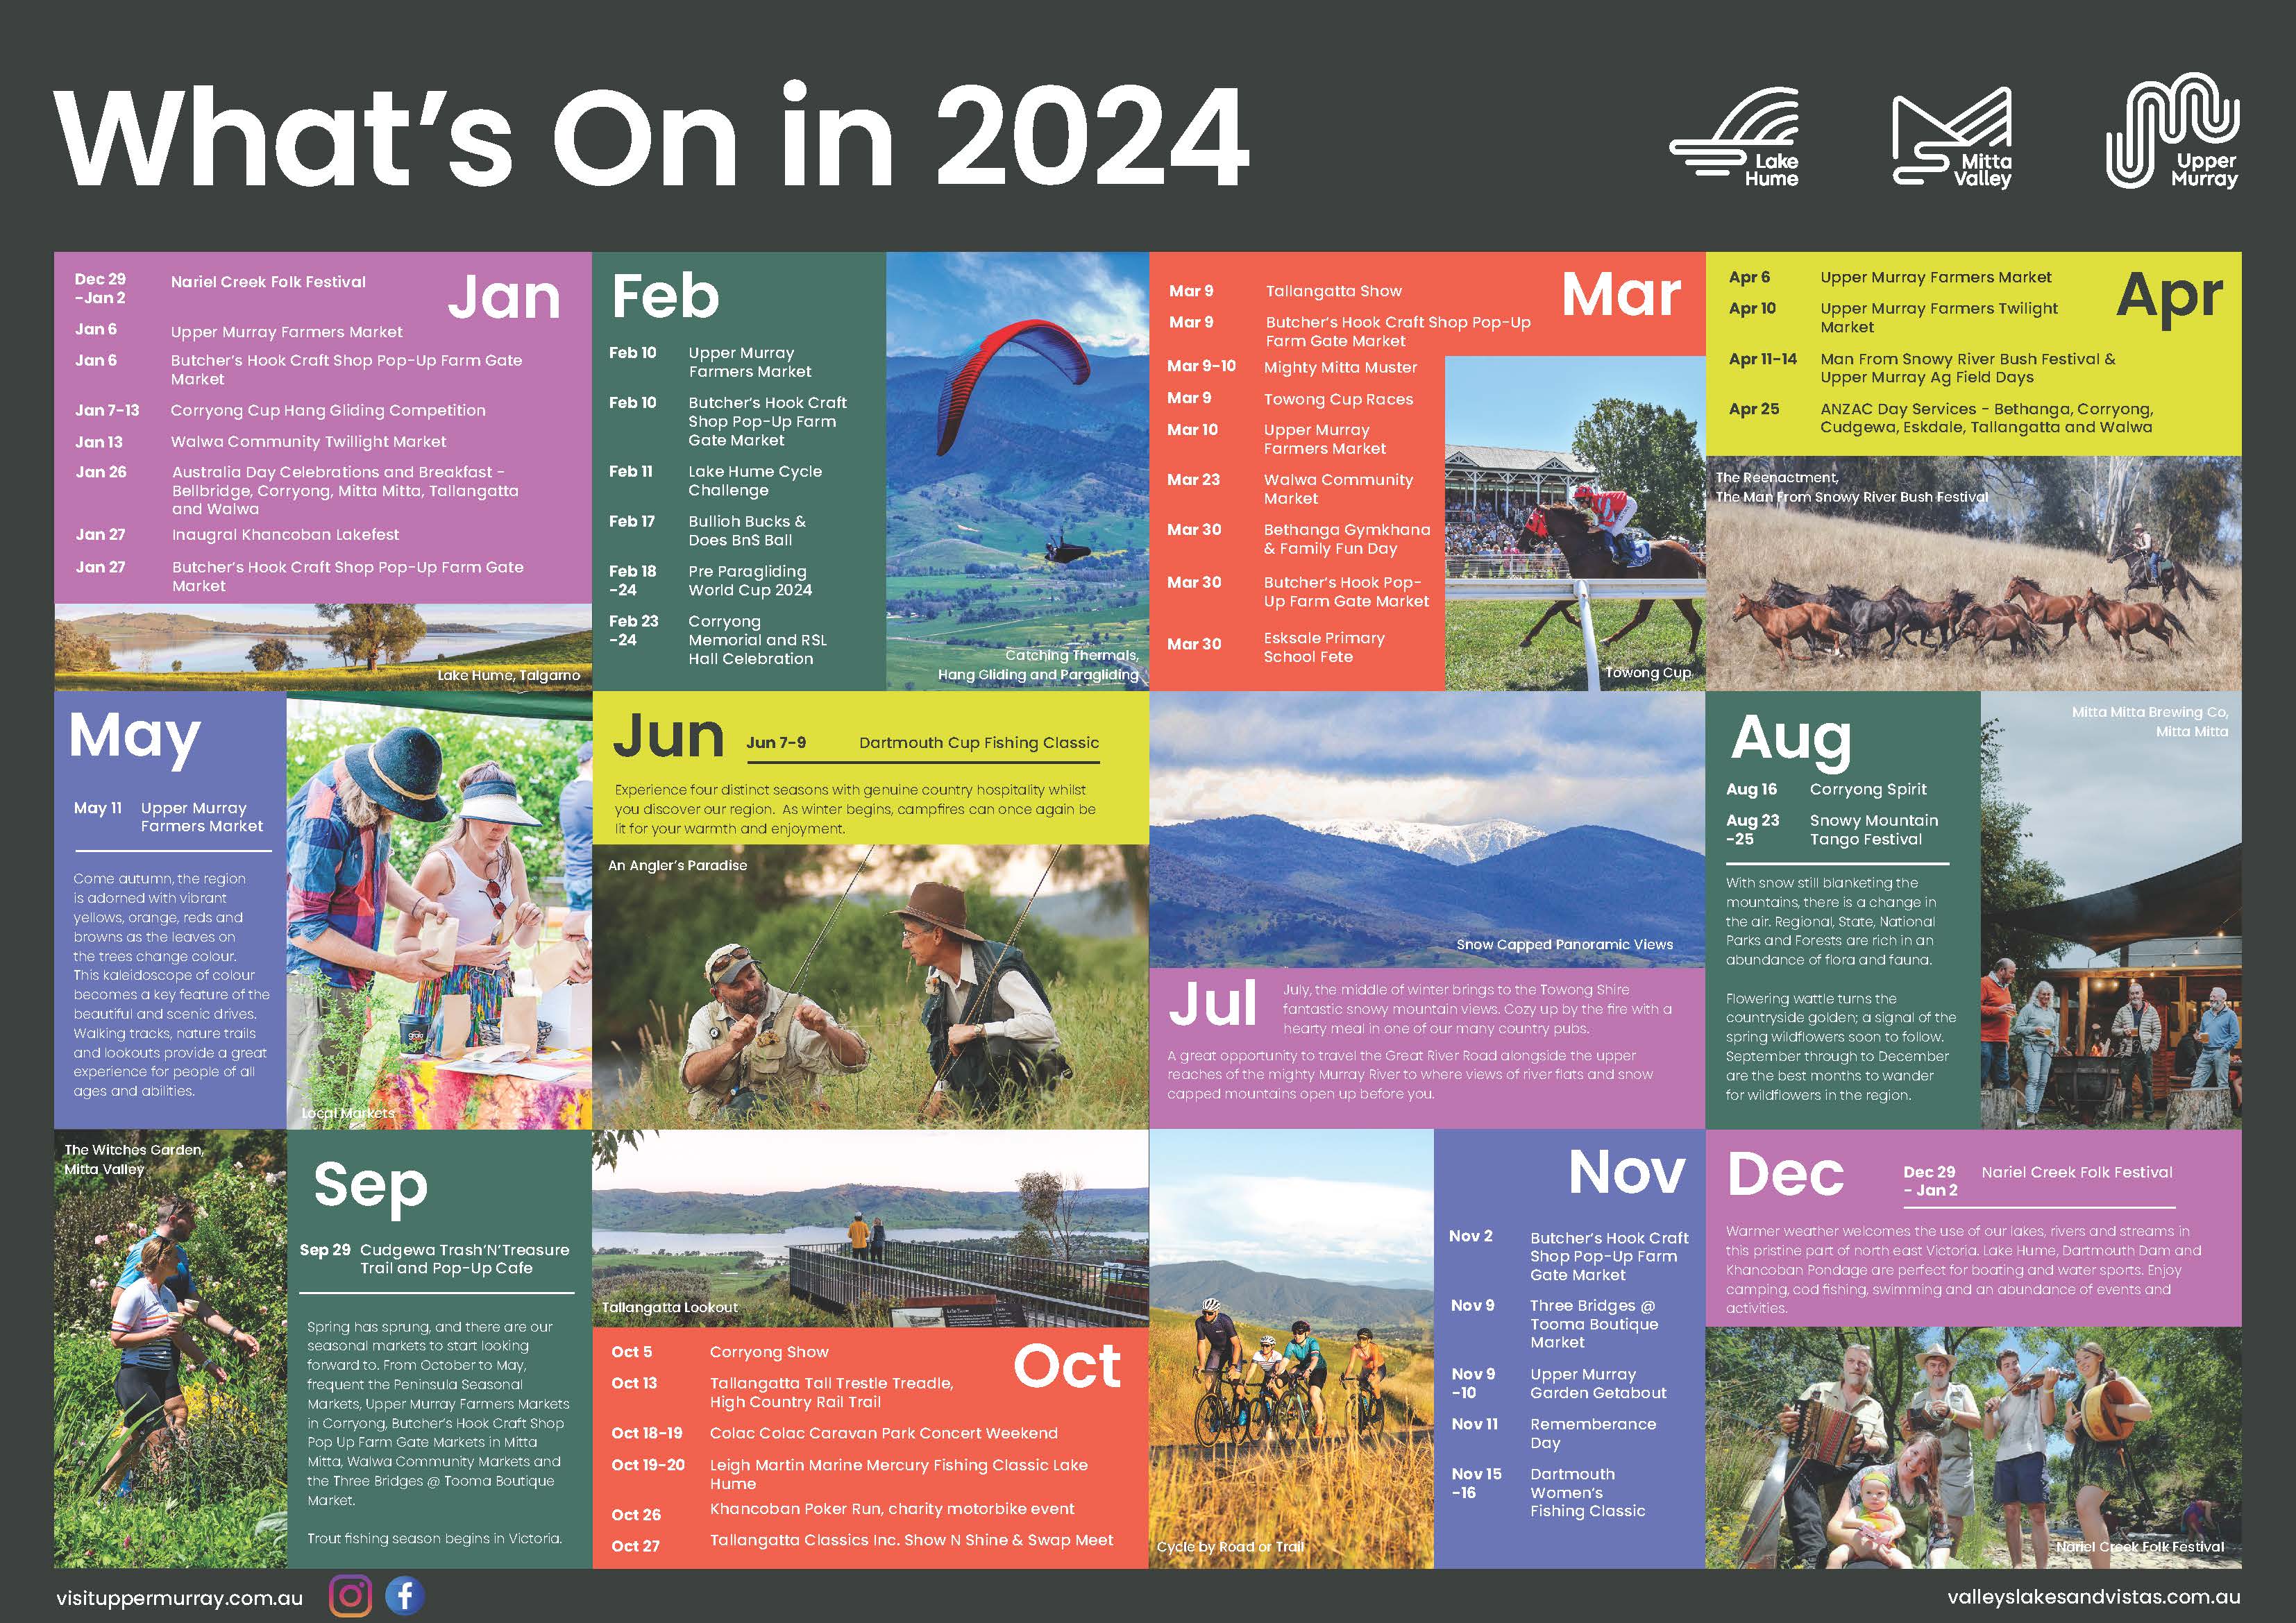 Calendar of Events across Towong Shire - Upper Murray, Mitta Valley, Lake Hume - throughout 2024